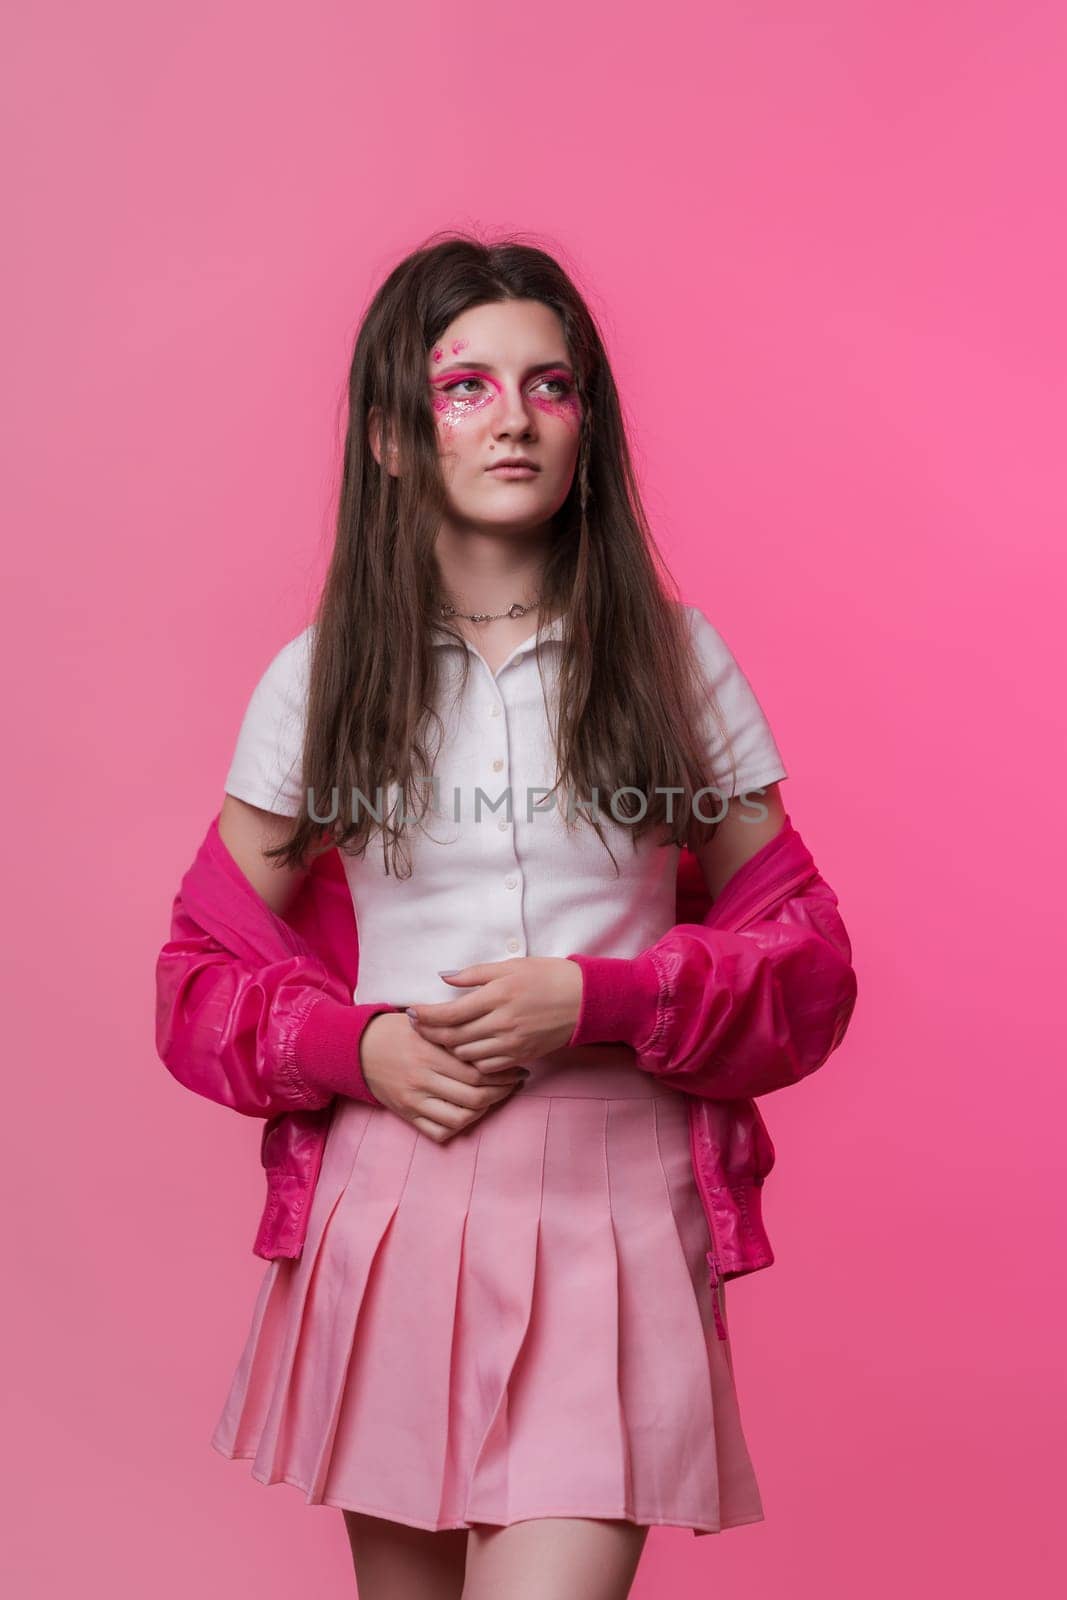 Portrait of serious woman with pink make-up with sparkles and arrows, dressed in pink jacket, skirt, white t-shirt. Studio shot of young adult hipster female on pink background. Part of photo series